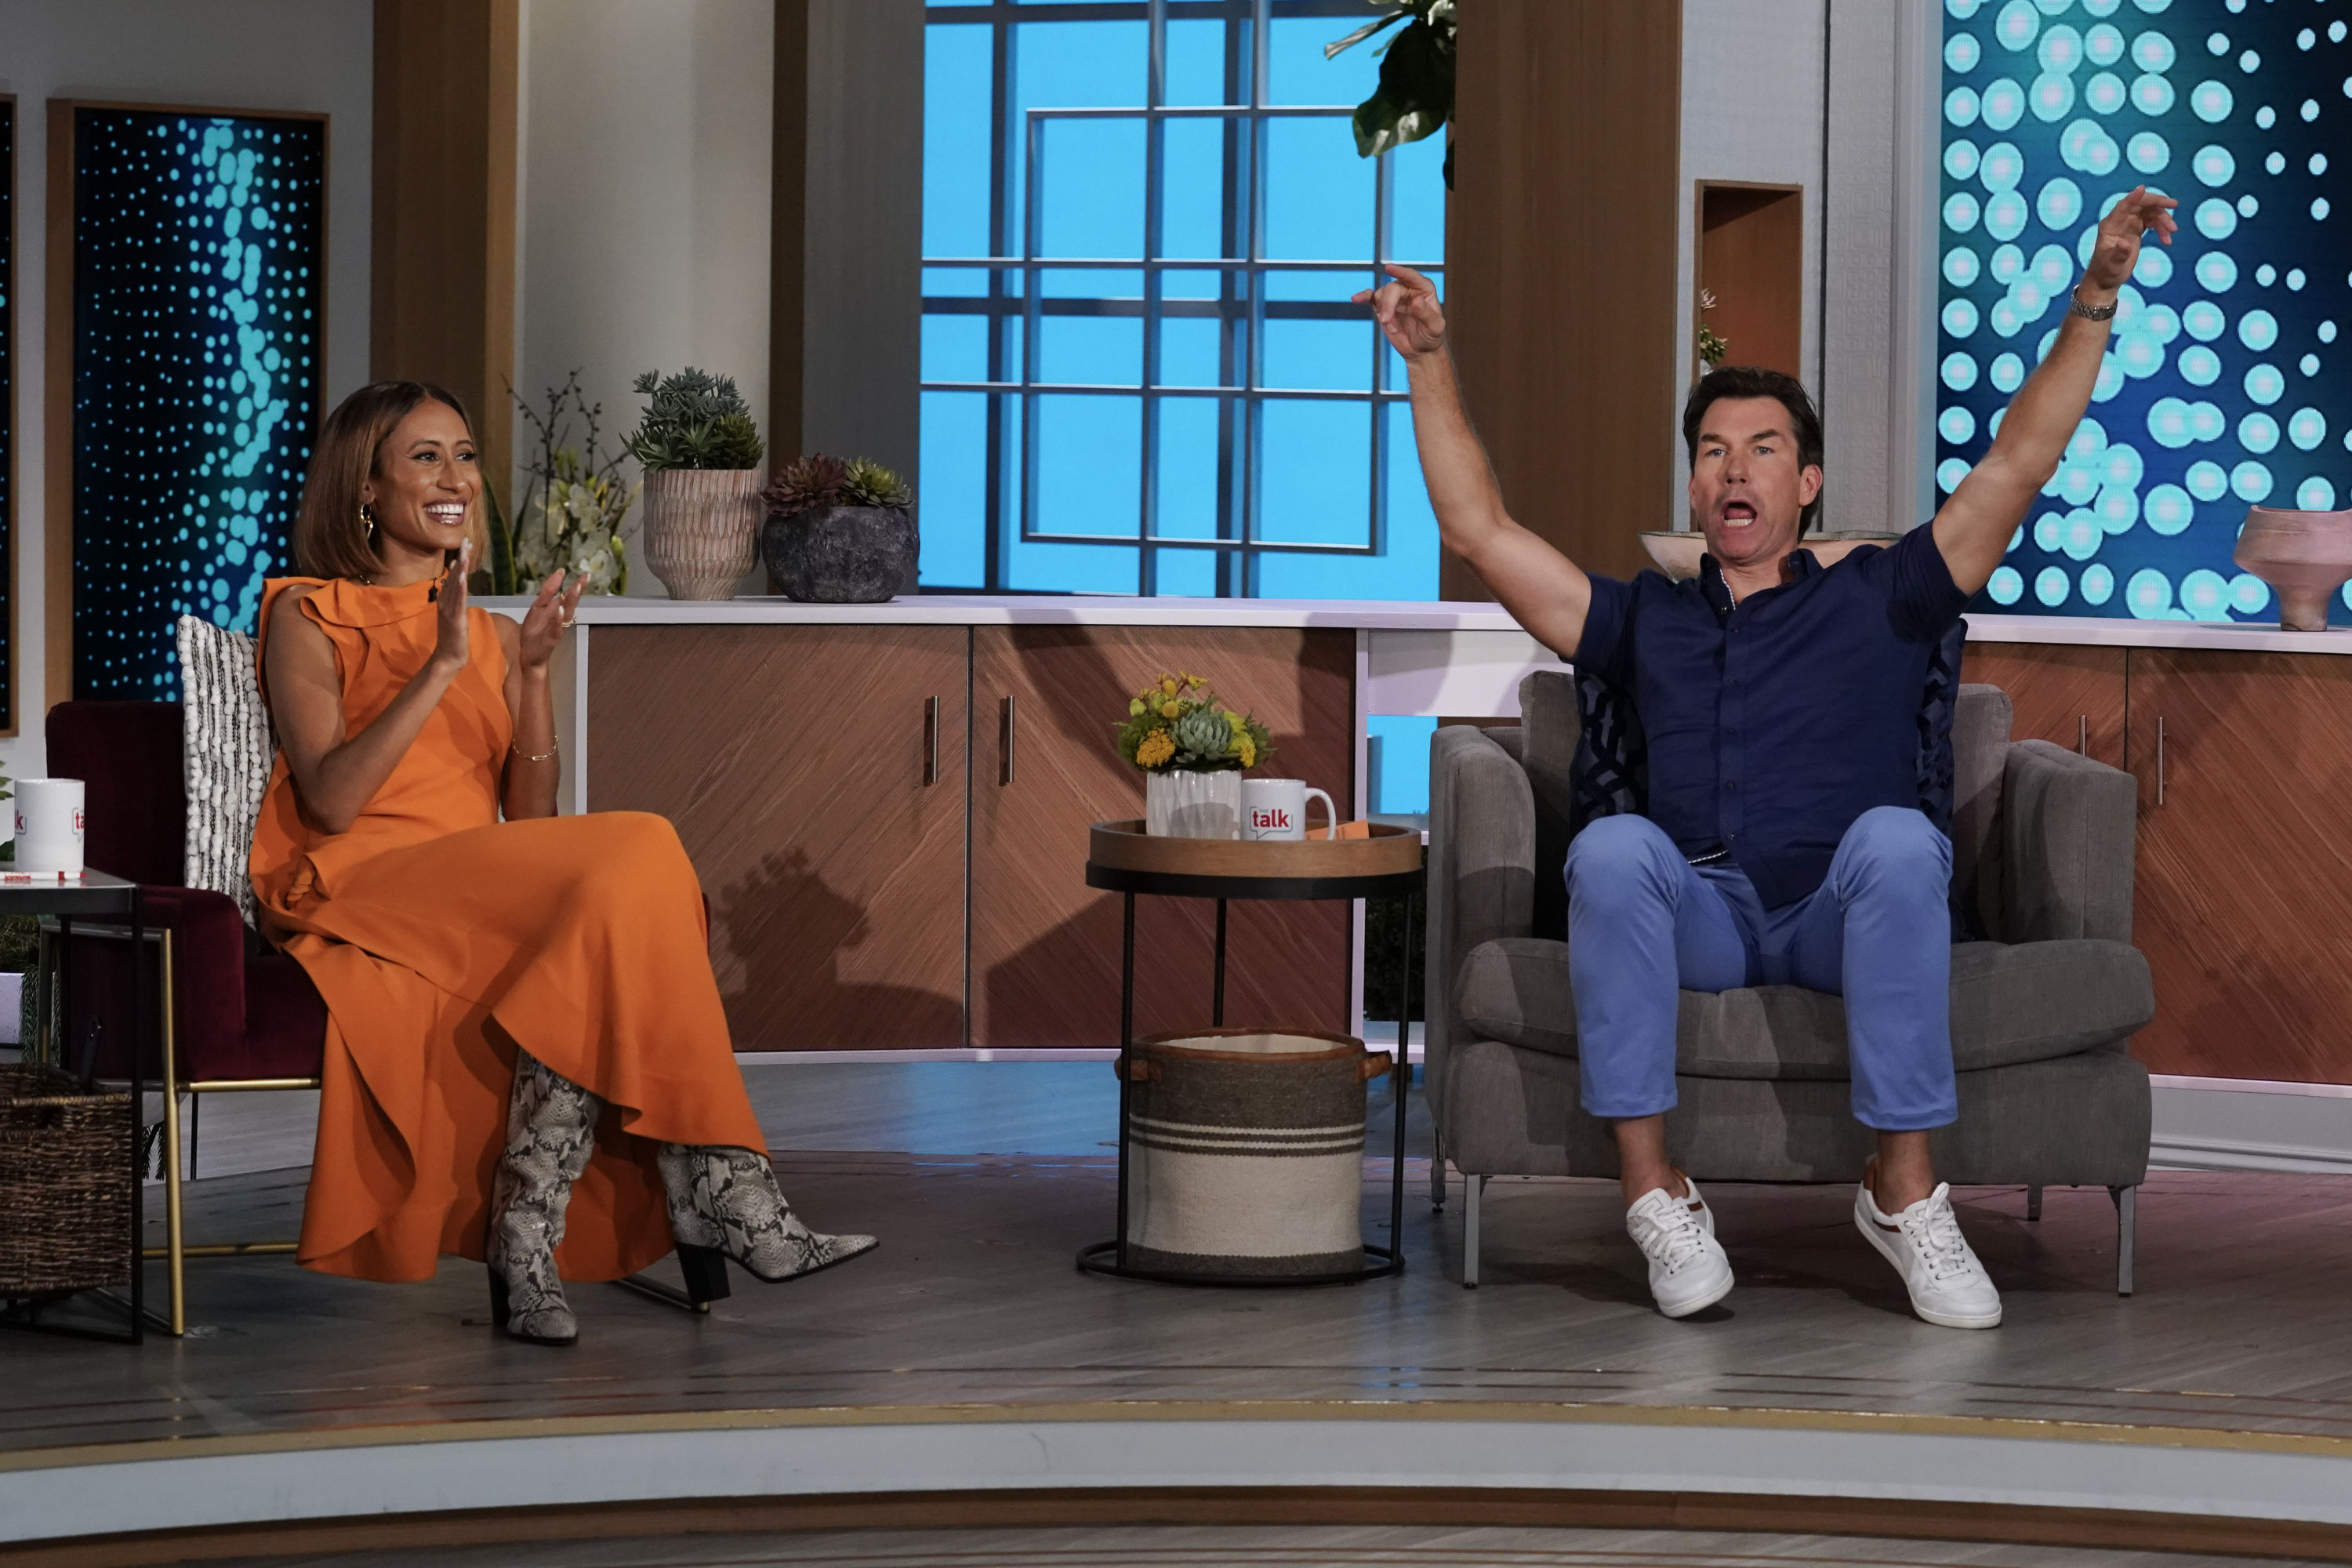 Elaine Welteroth claps while Jerry O'Connell cheers on the set of 'The Talk'